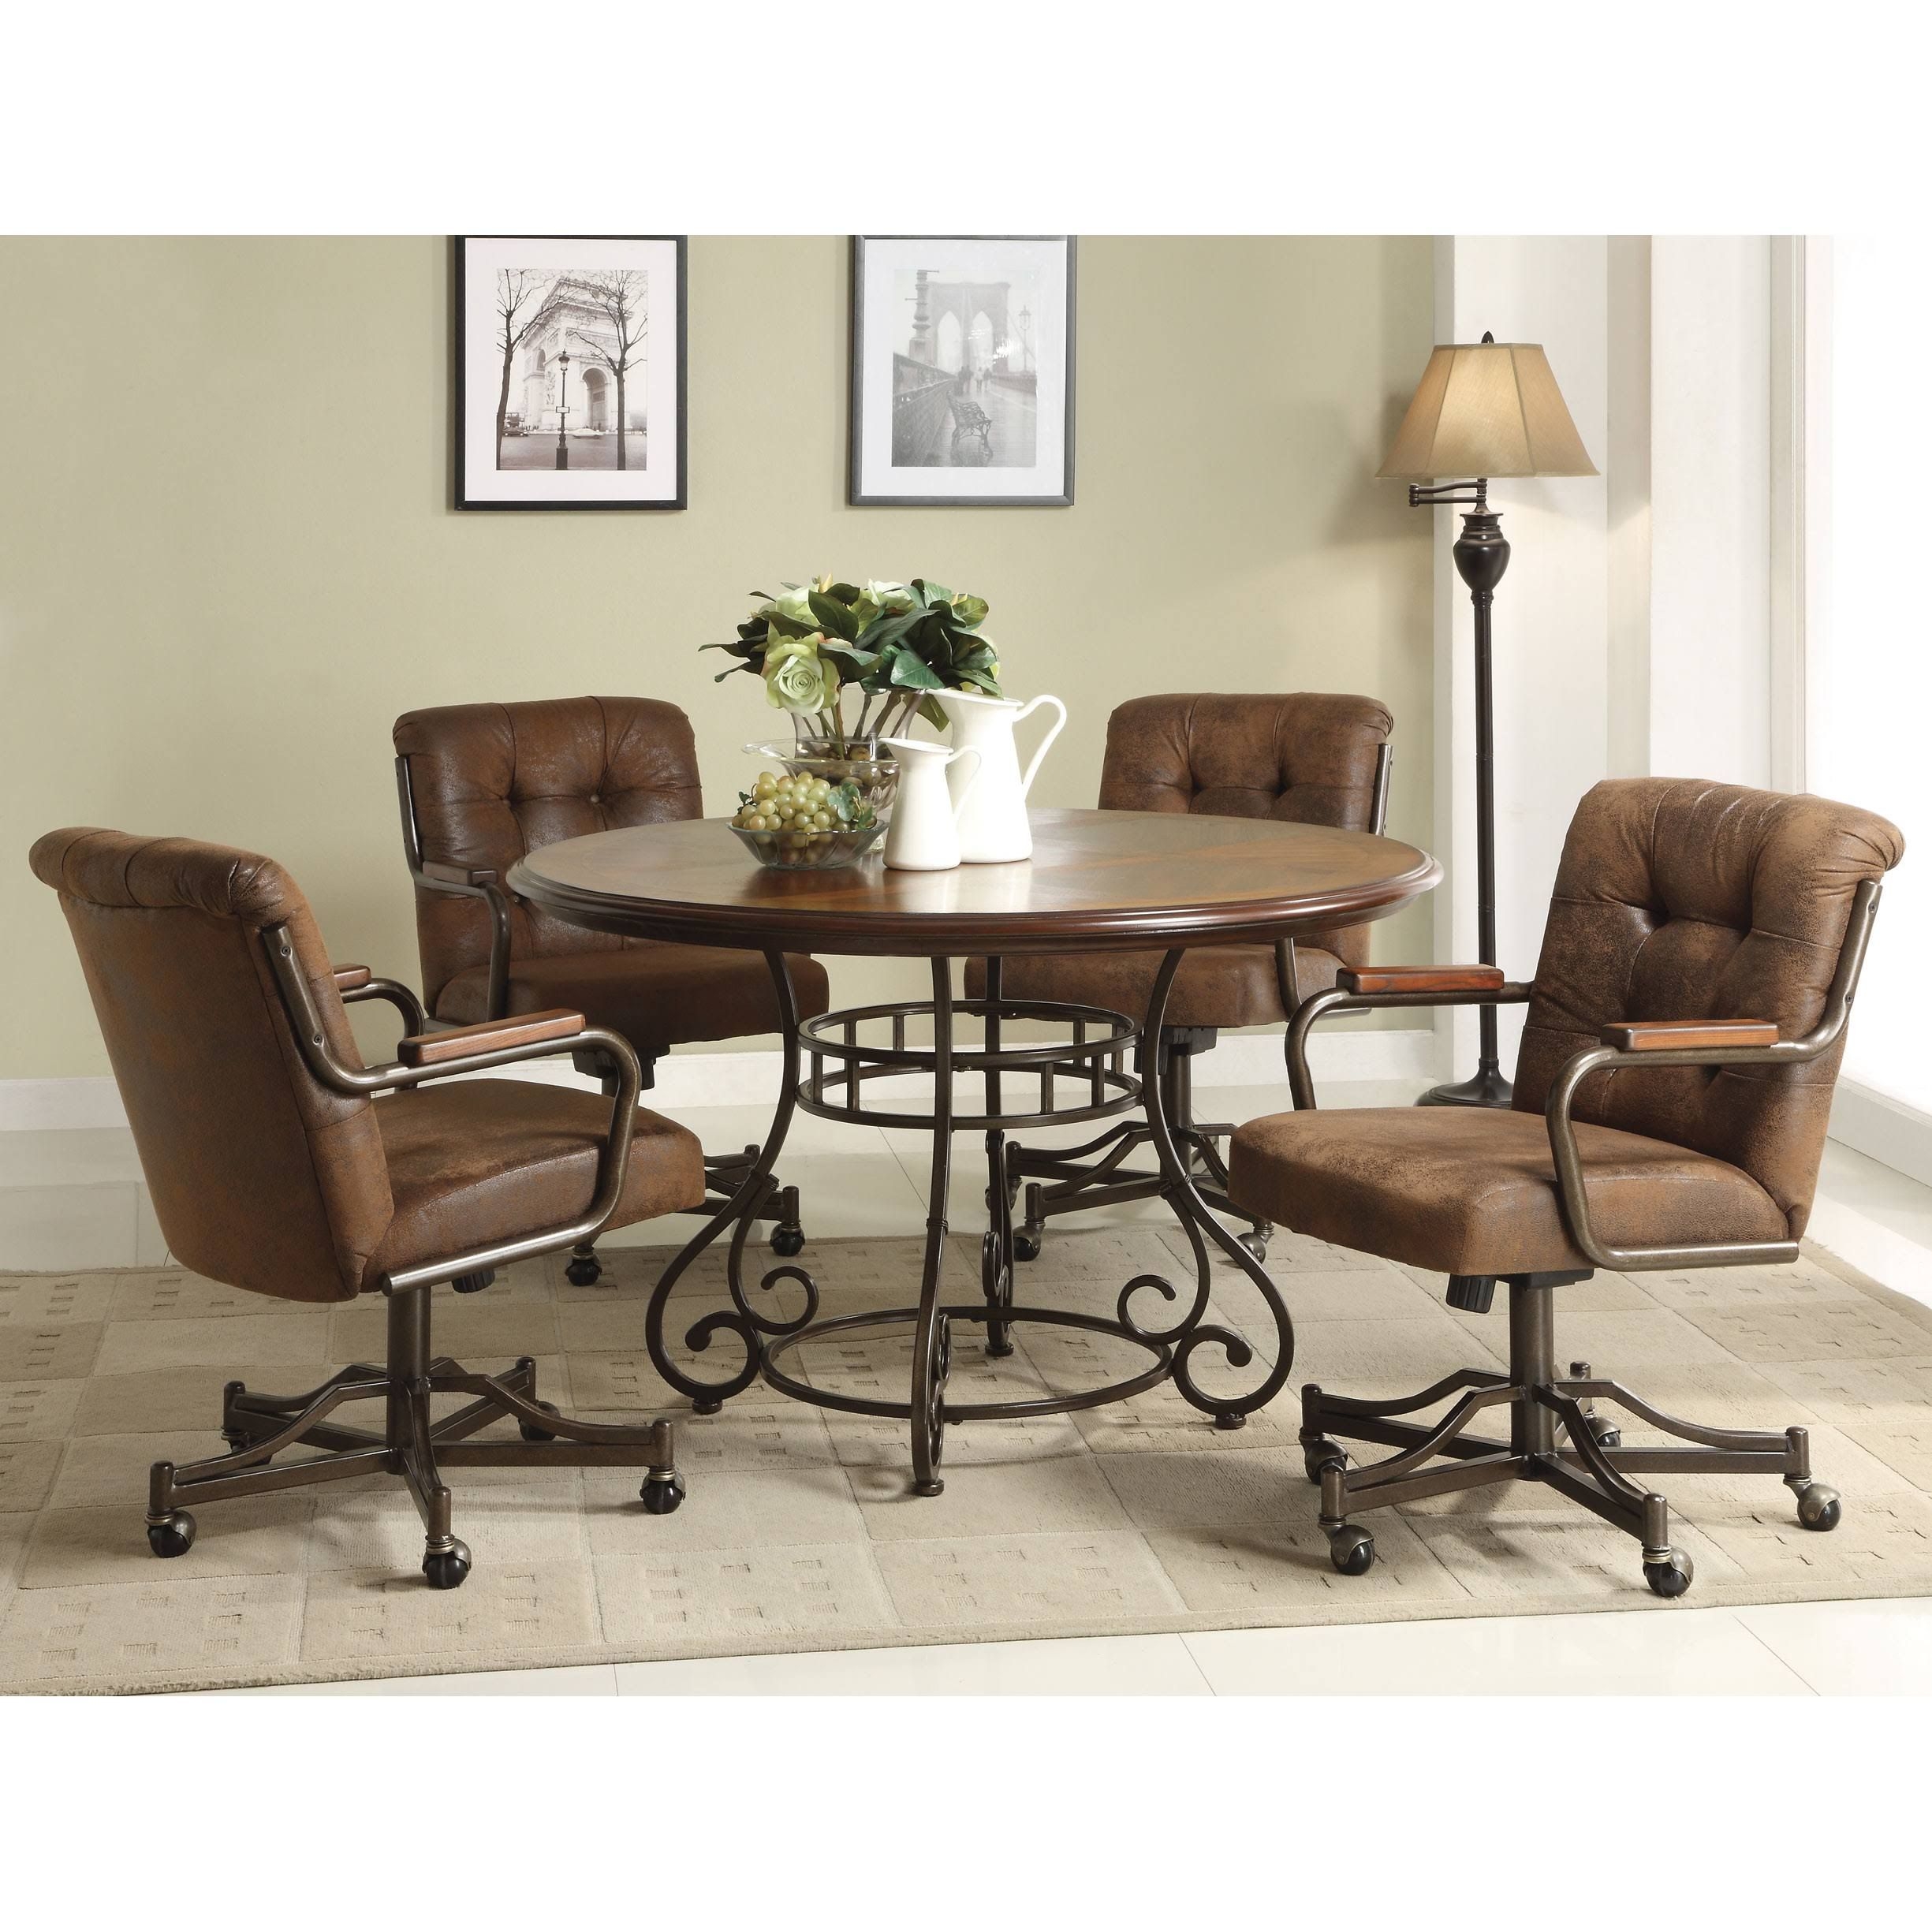 Kitchen Table Sets With Caster Chairs Images Kitchen 1 